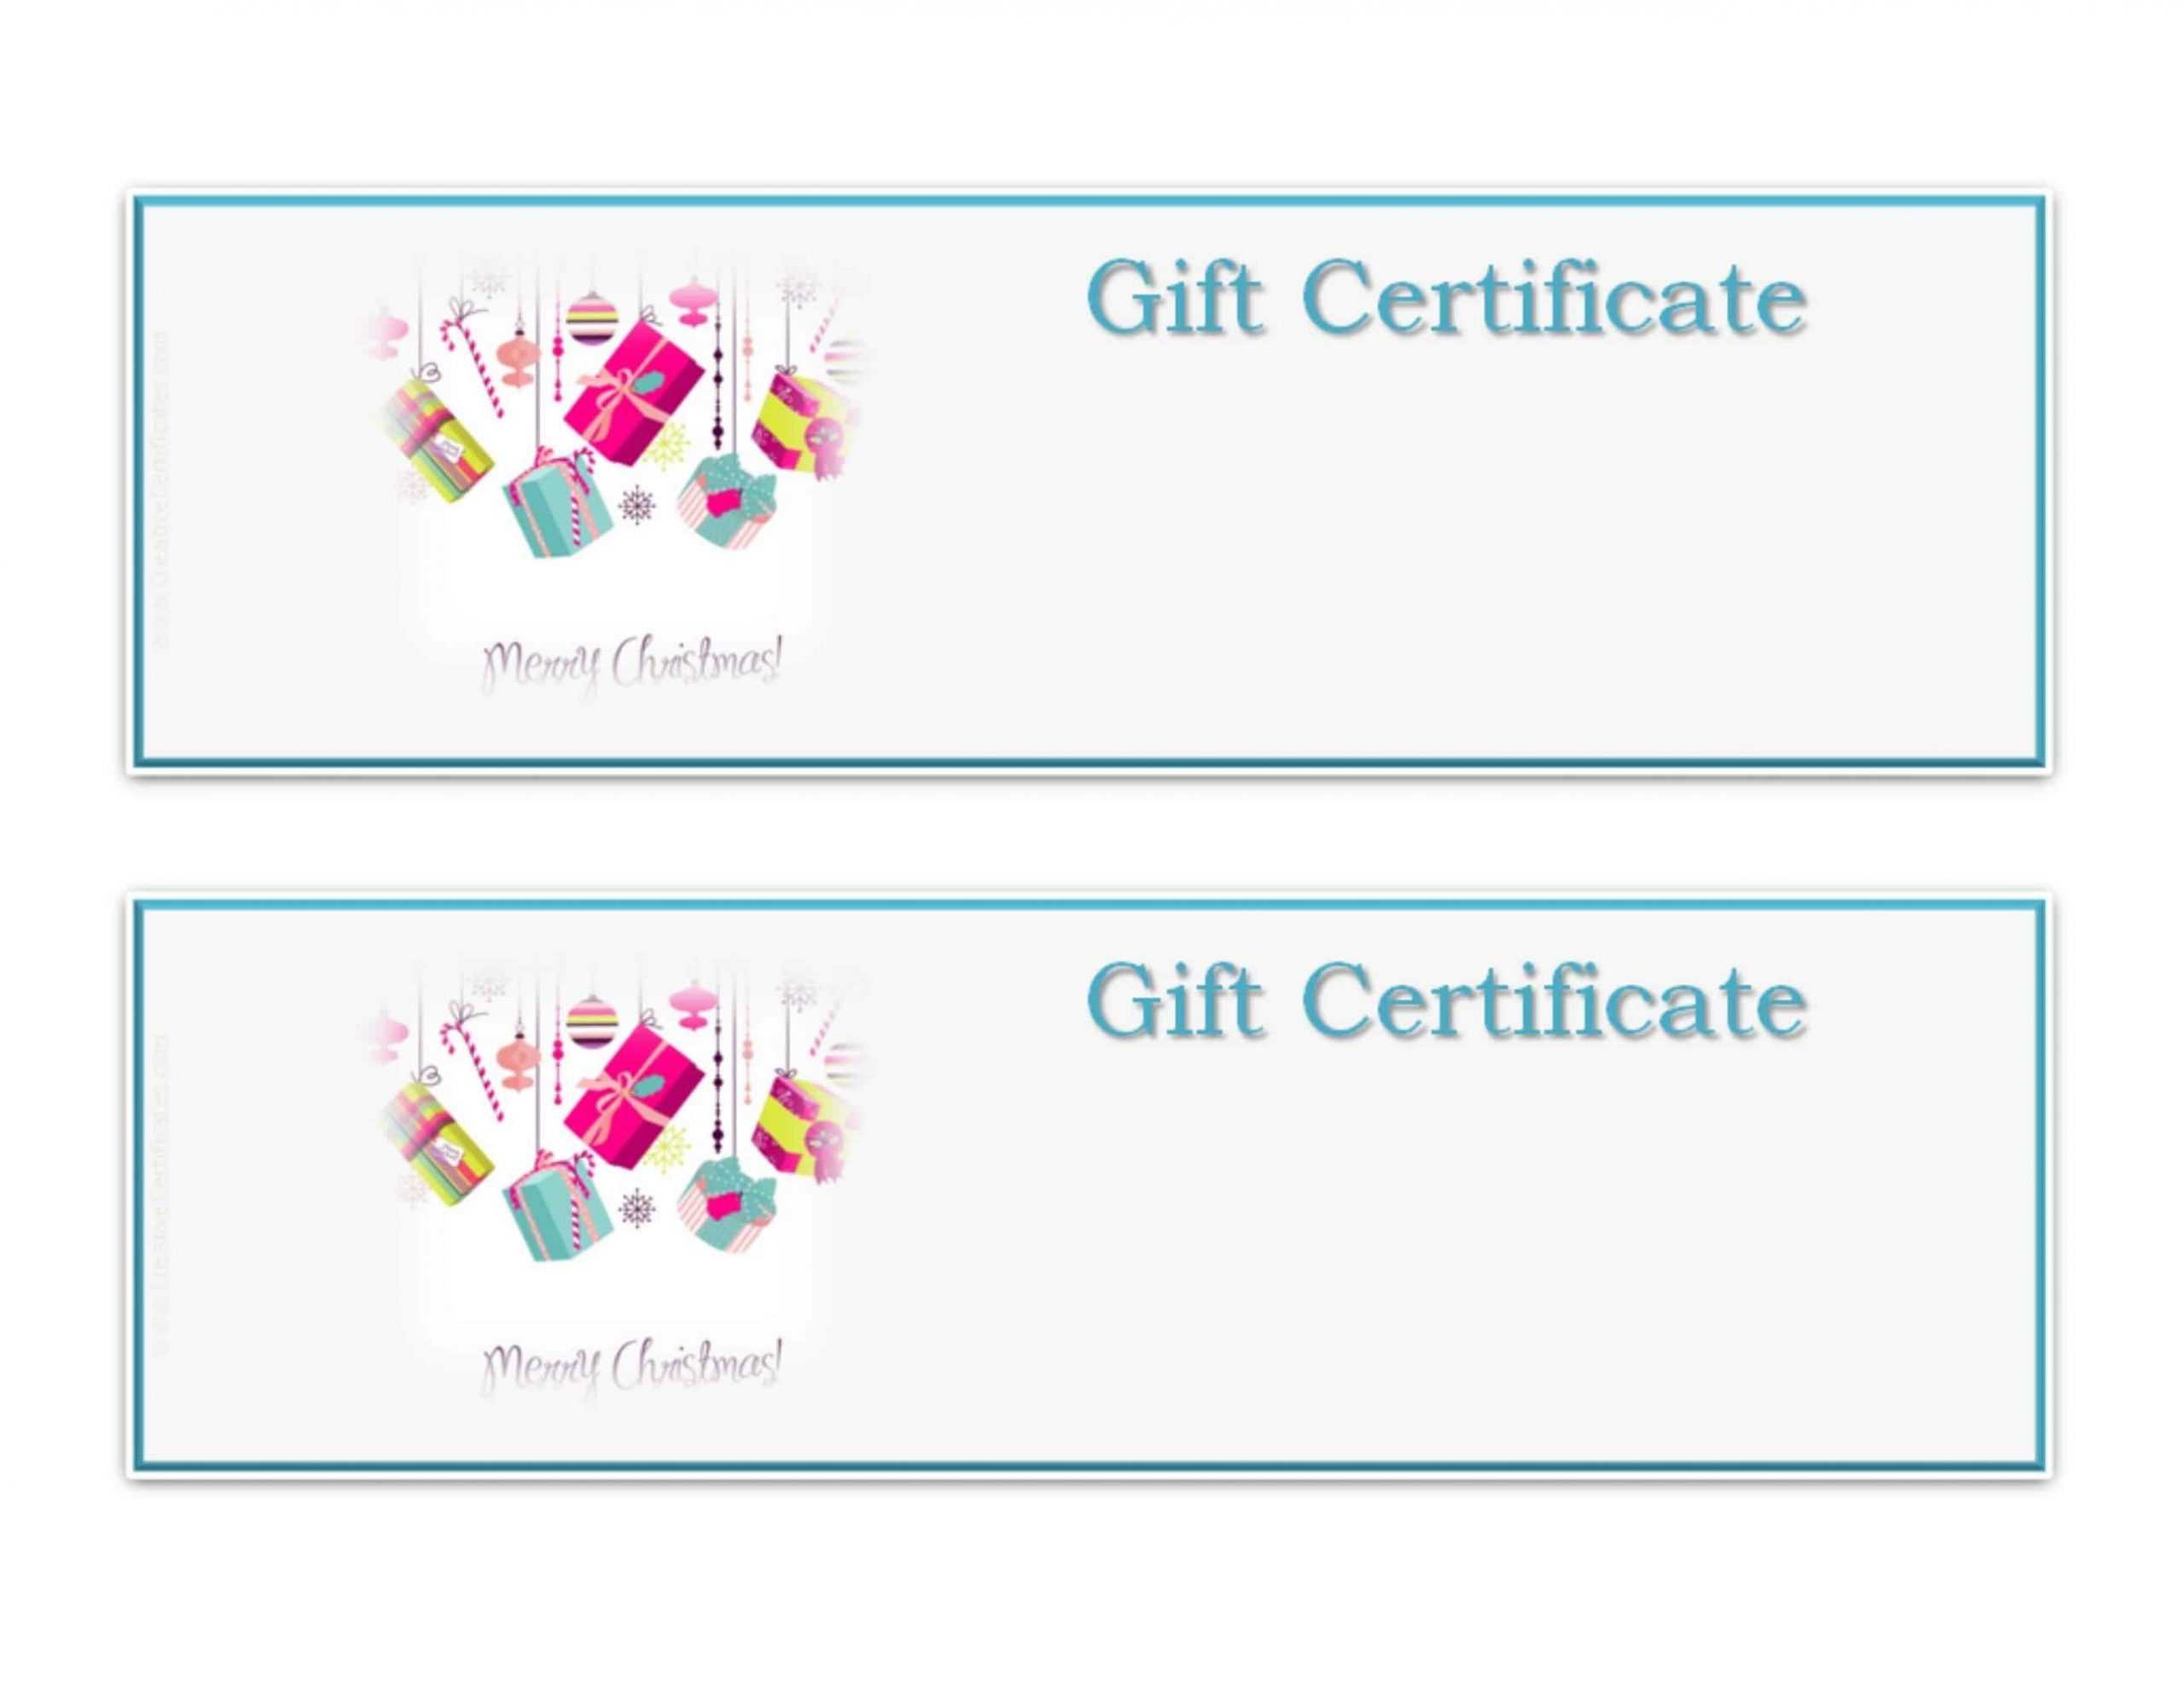 Gift Certificate Templates To Print For Free | 101 Activity Pertaining To Merry Christmas Gift Certificate Templates